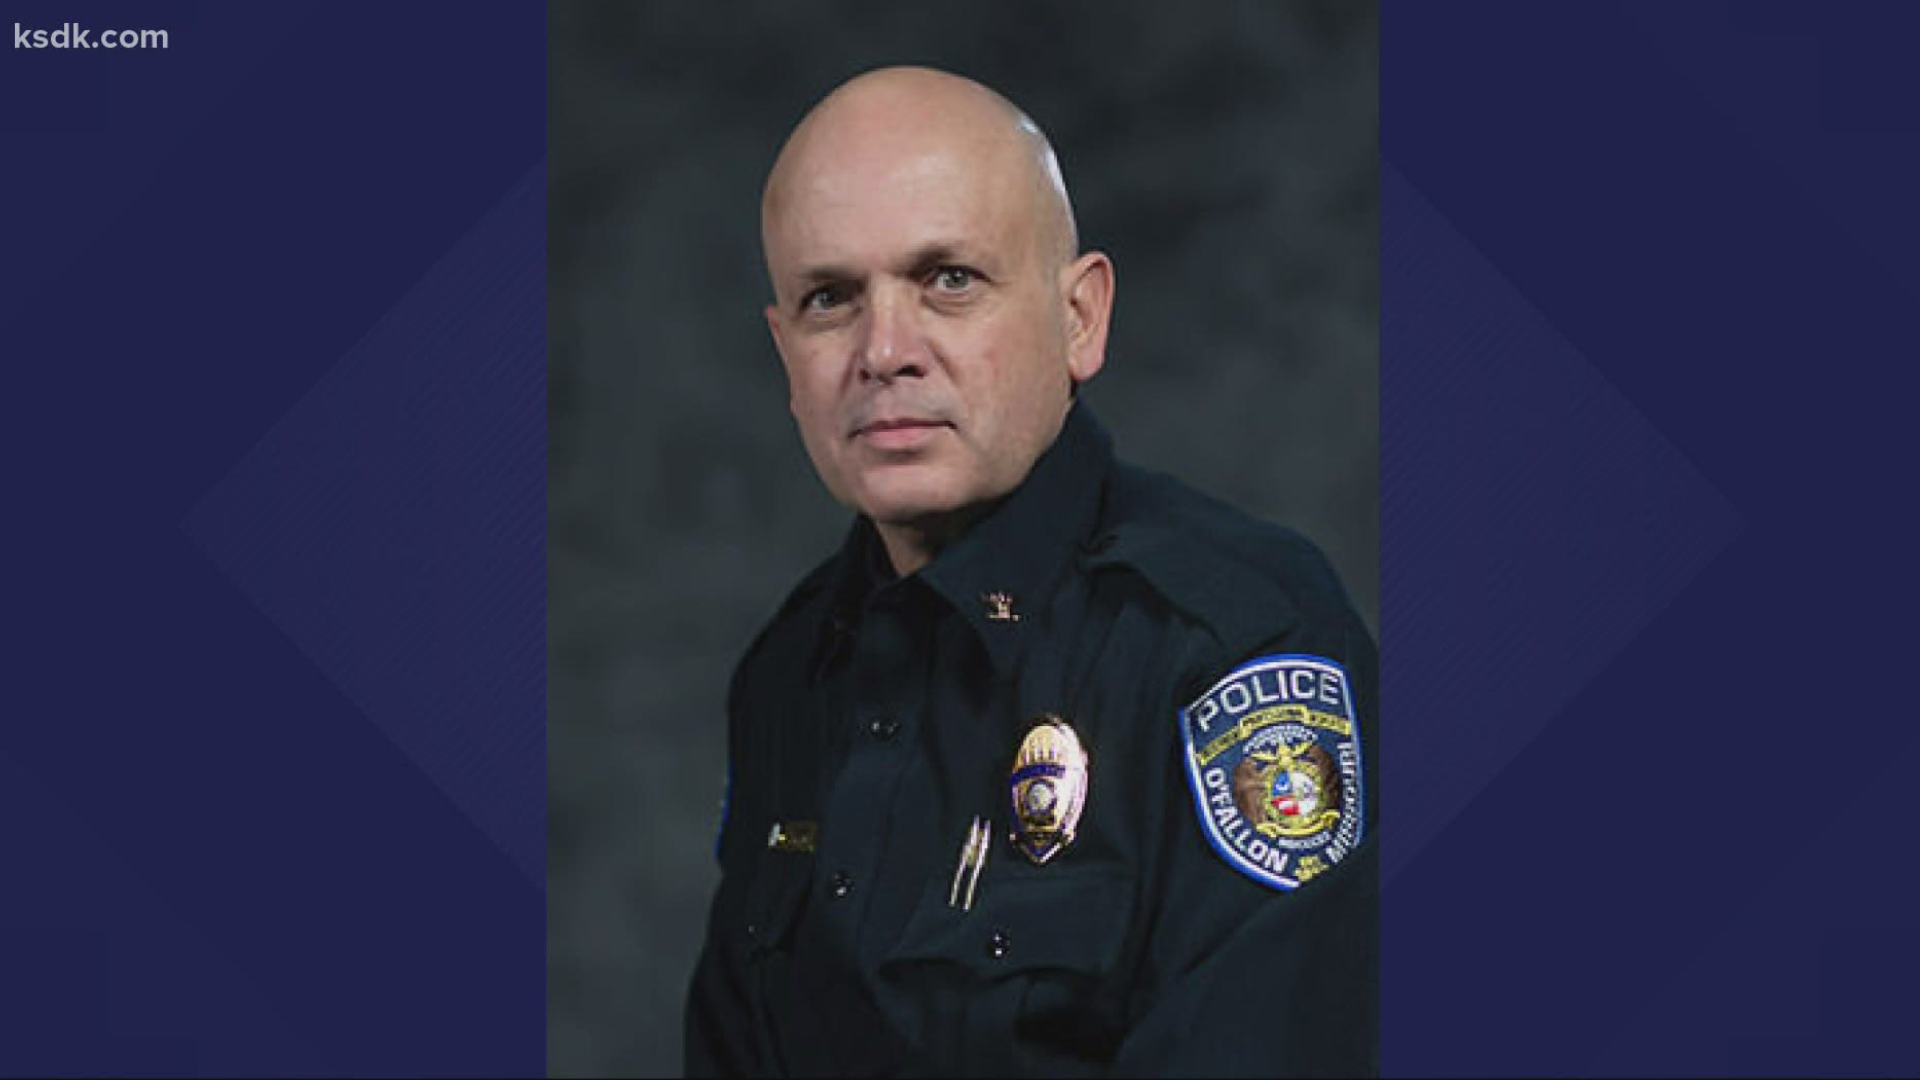 Chief Timothy Clothier submitted his resignation letter this week after only 18 months on the job